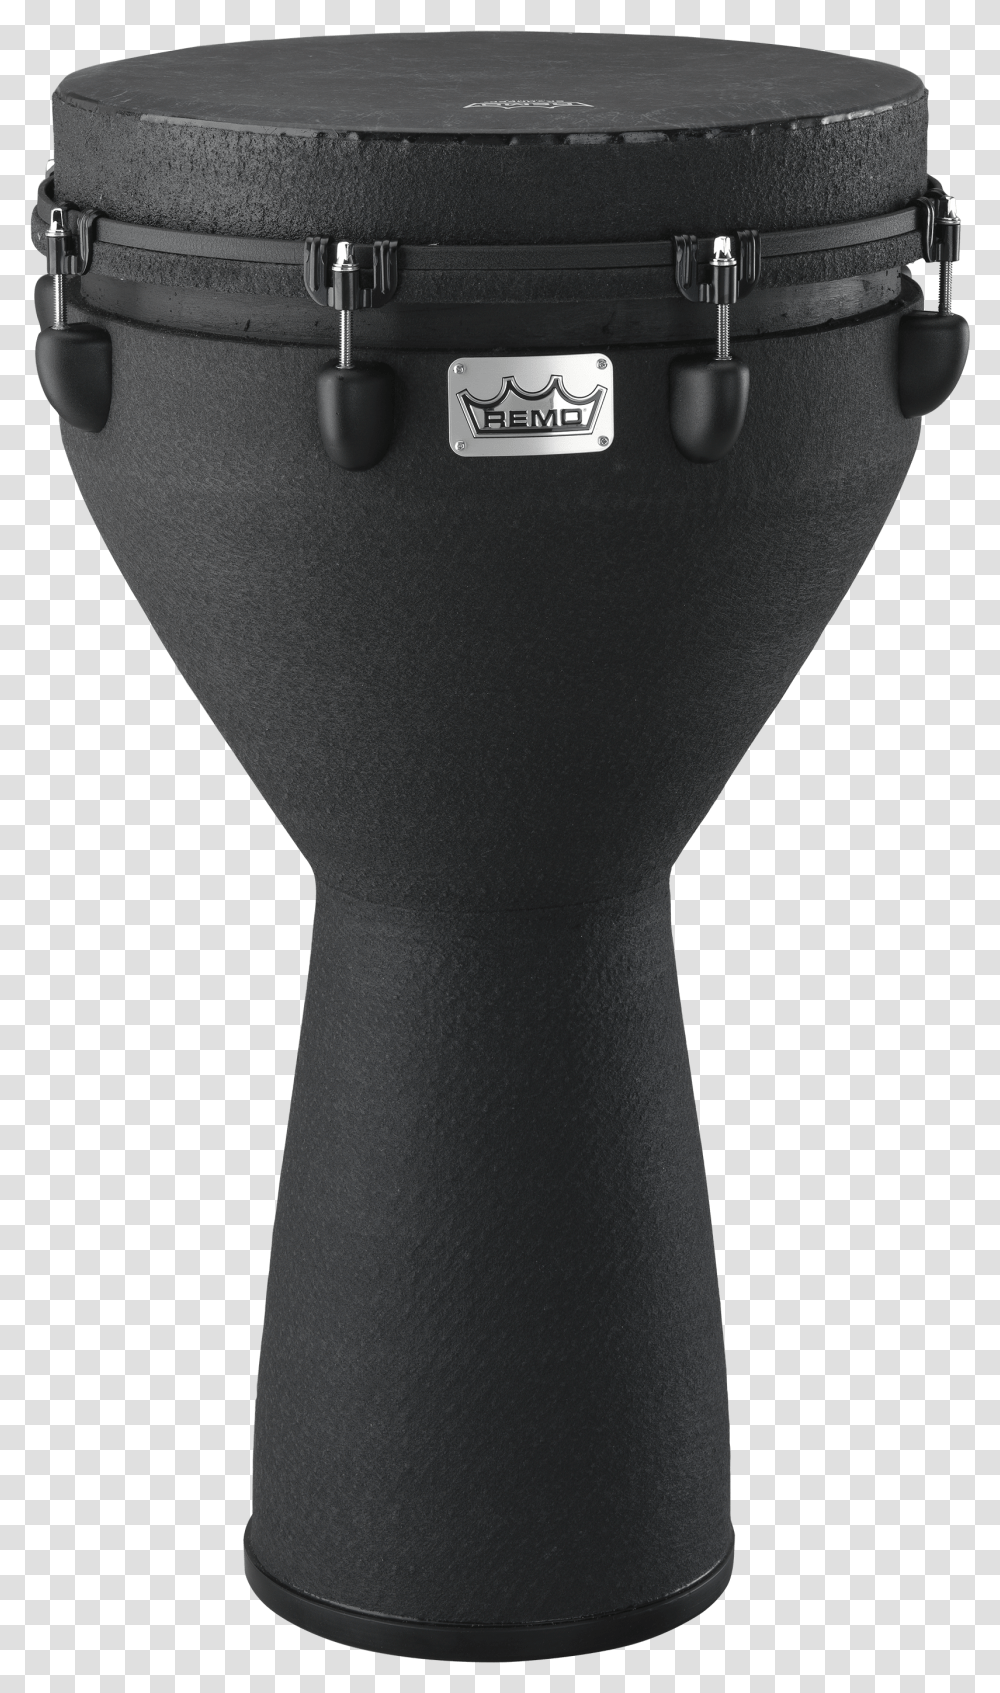 Remo Mondo Djembe Black, Drum, Percussion, Musical Instrument, Leisure Activities Transparent Png